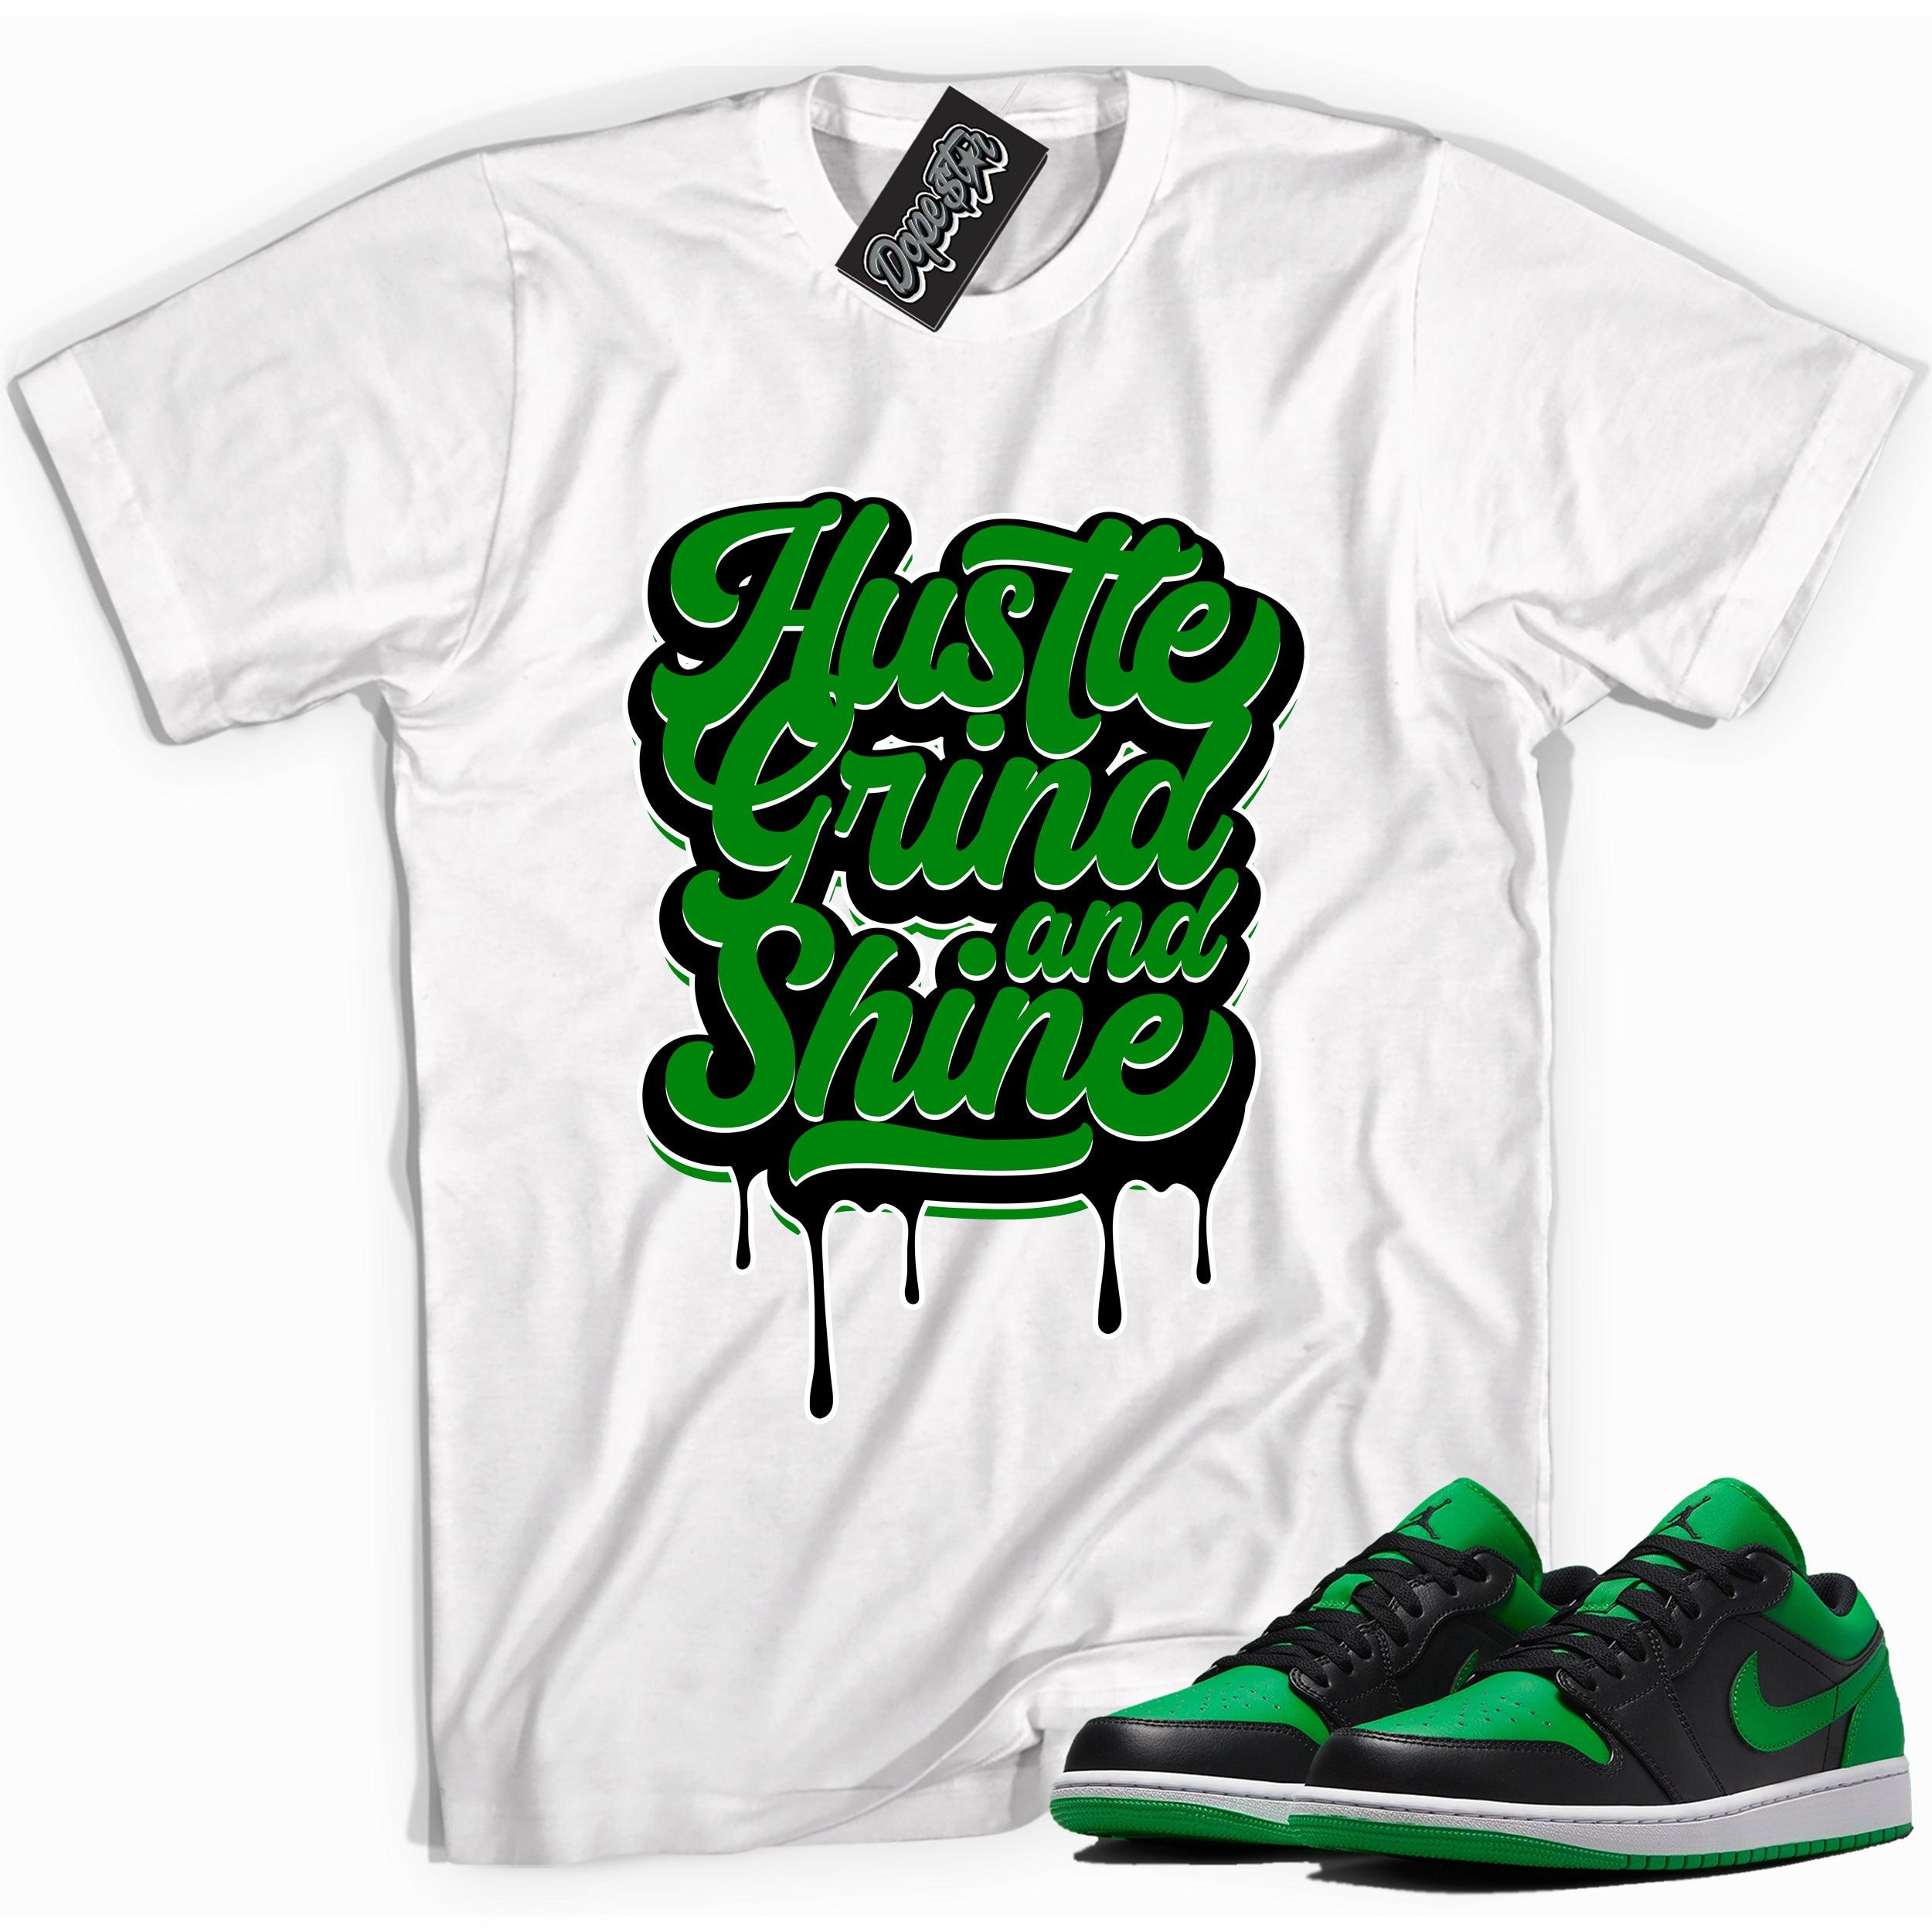 Cool white graphic tee with 'Hustle Grind & Shine' print, that perfectly matches Air Jordan 1 Low Lucky Green sneakers